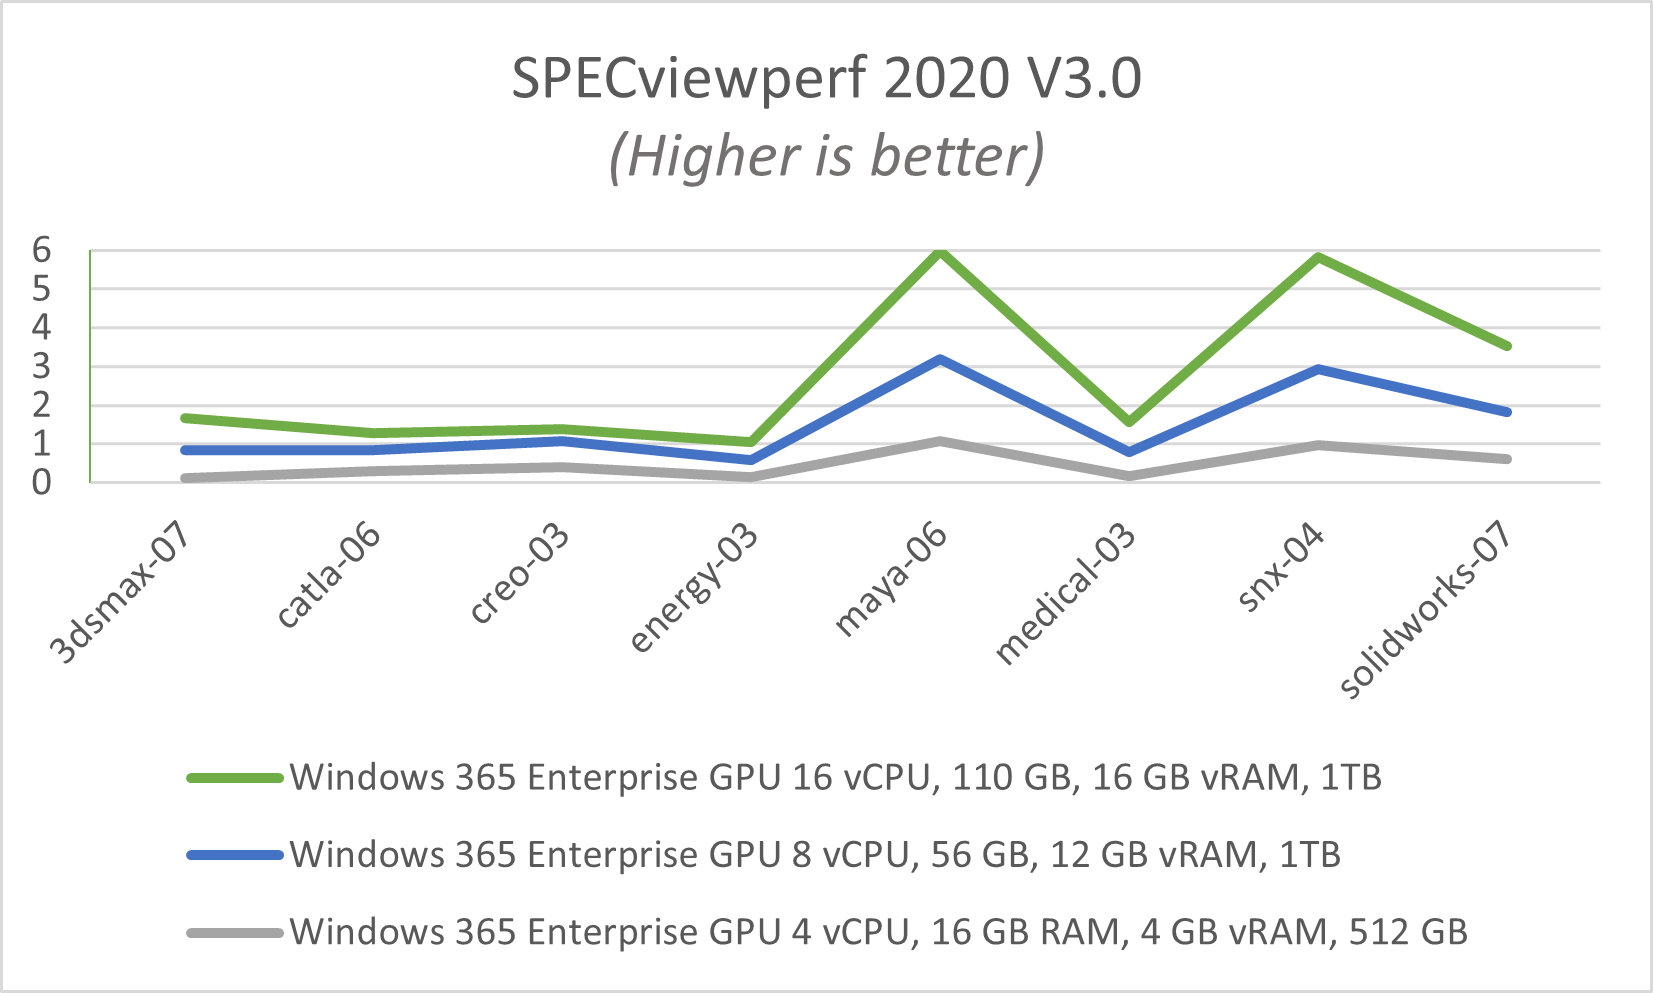 The performance of the three different Windows 365 GPU configurations based on SPECviewperf viewsets results.